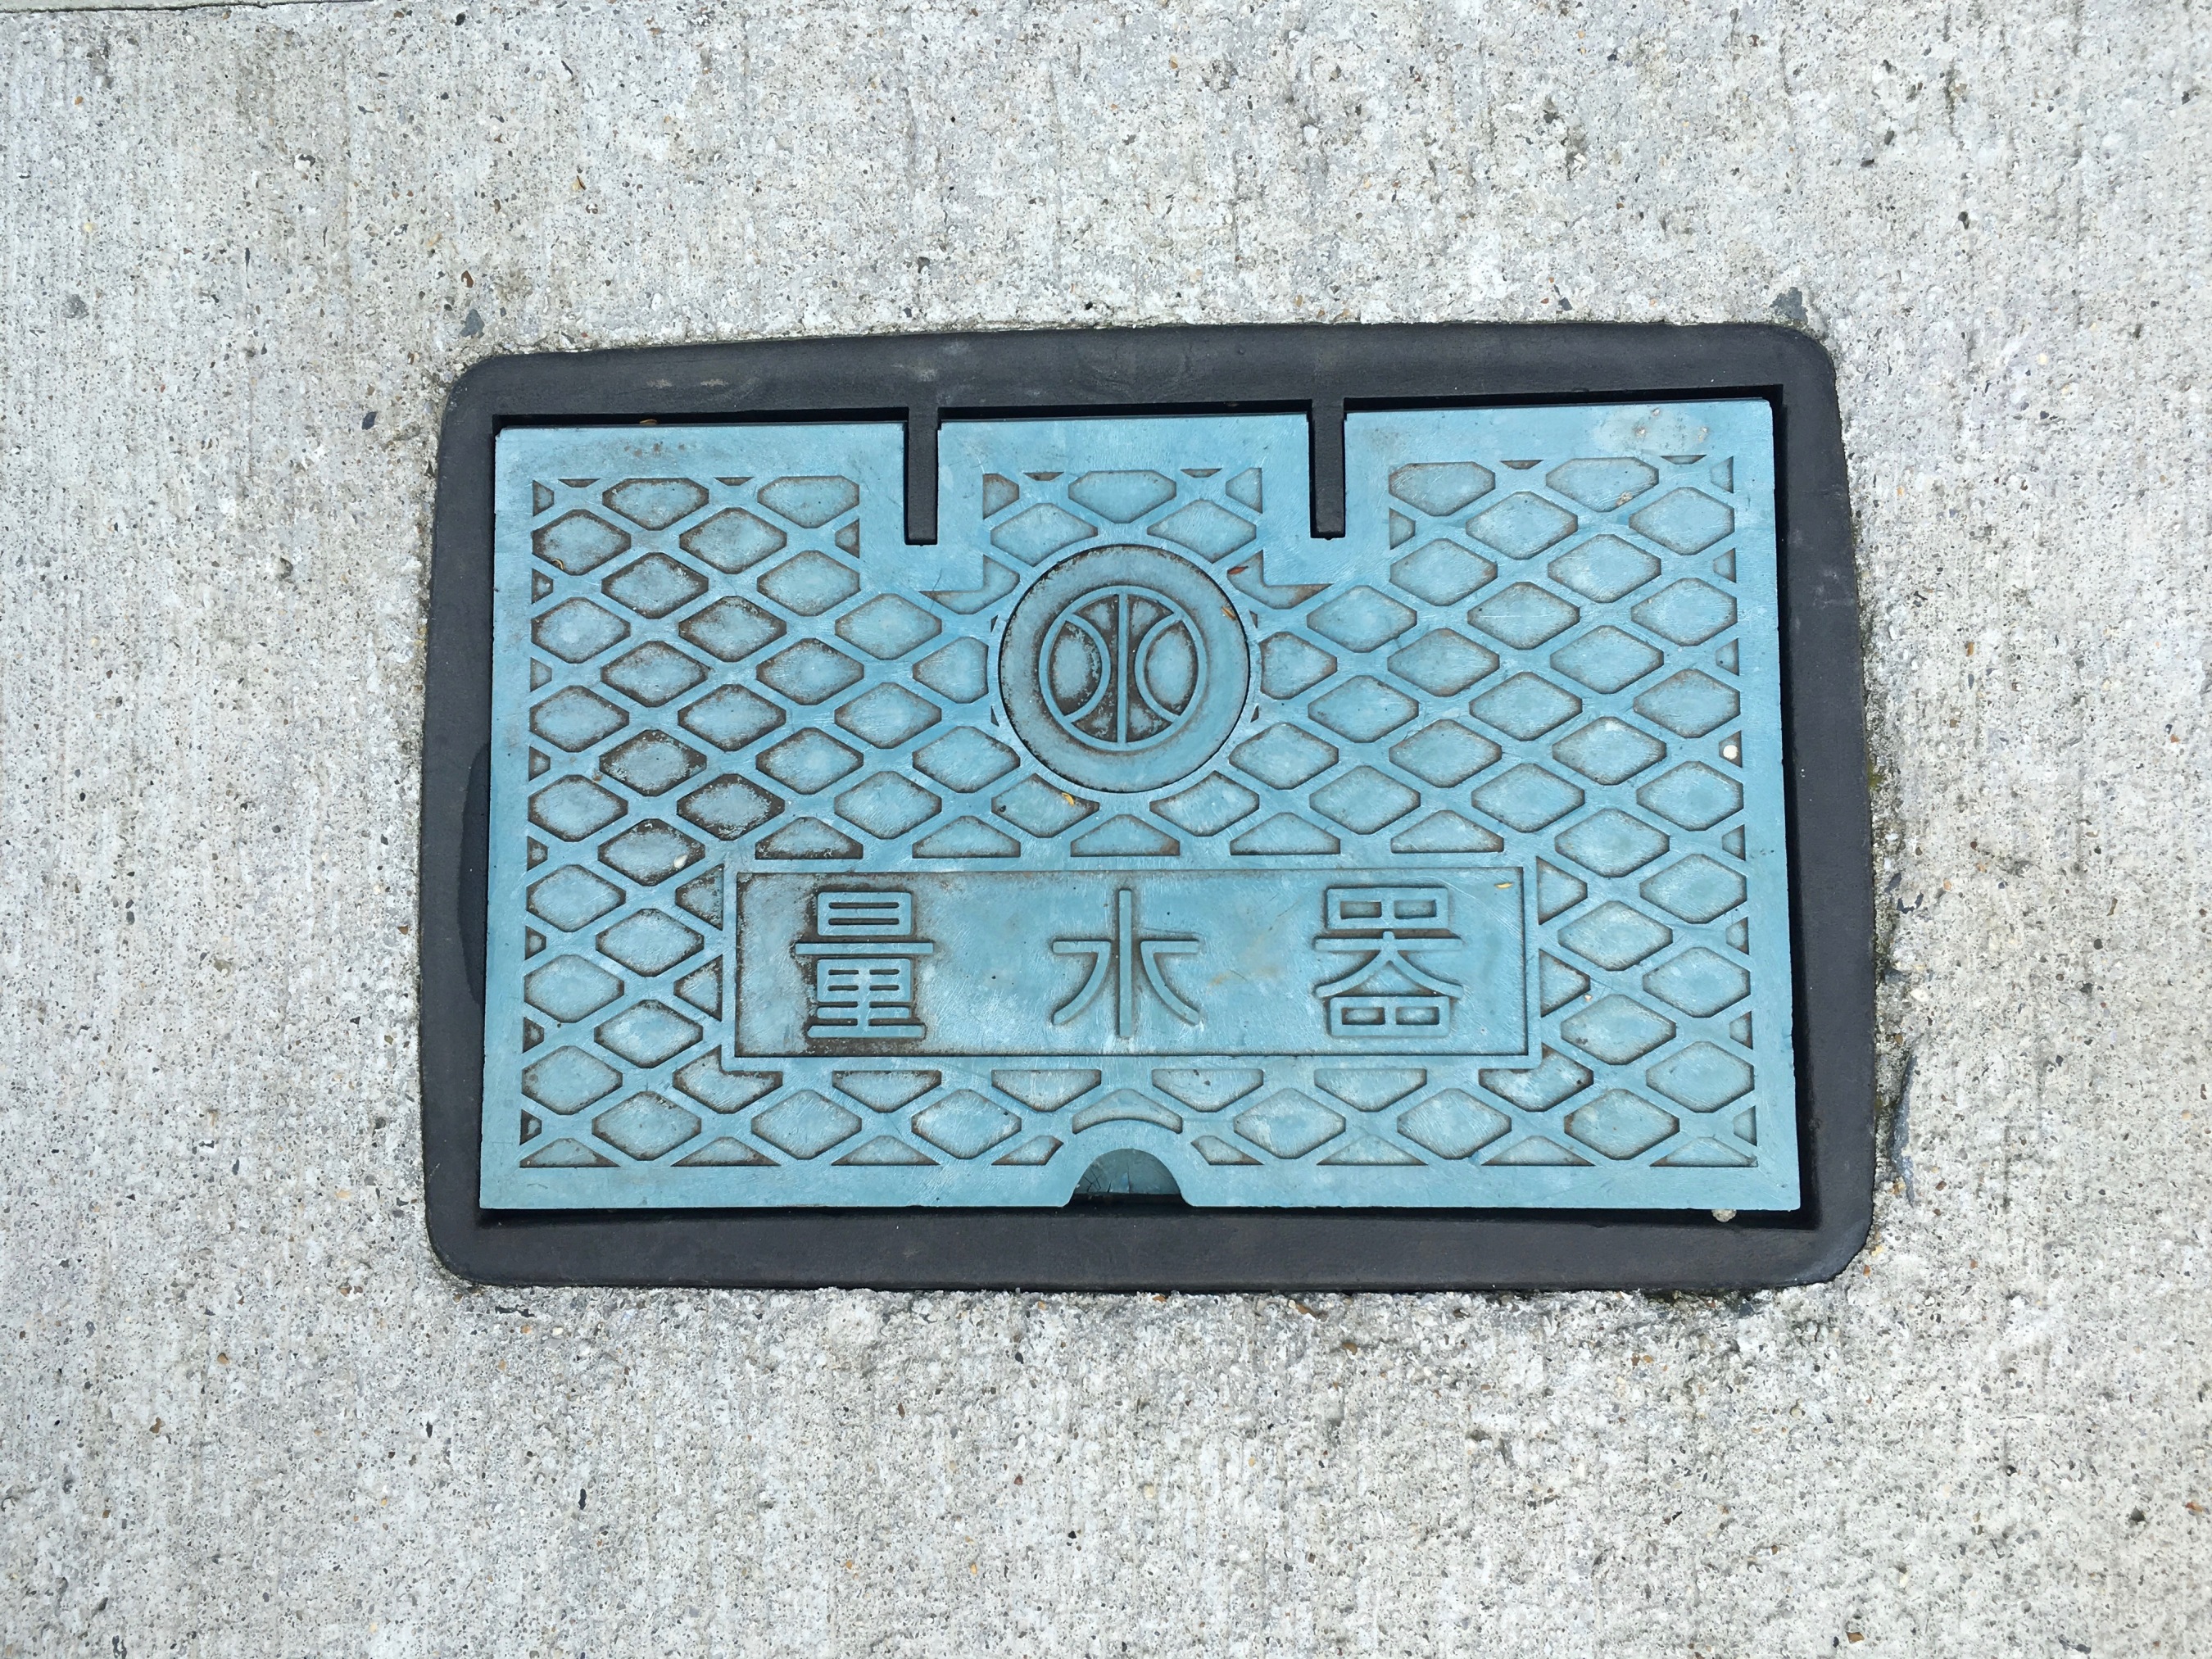 The stylised kanji for water can be seen in these access plates, presumably to the water pipes below. Once you know they are there, you see these access points fairly often while walking around the streets. The water that supplies the towns and cities of Japan will get a boost during the rainy season.